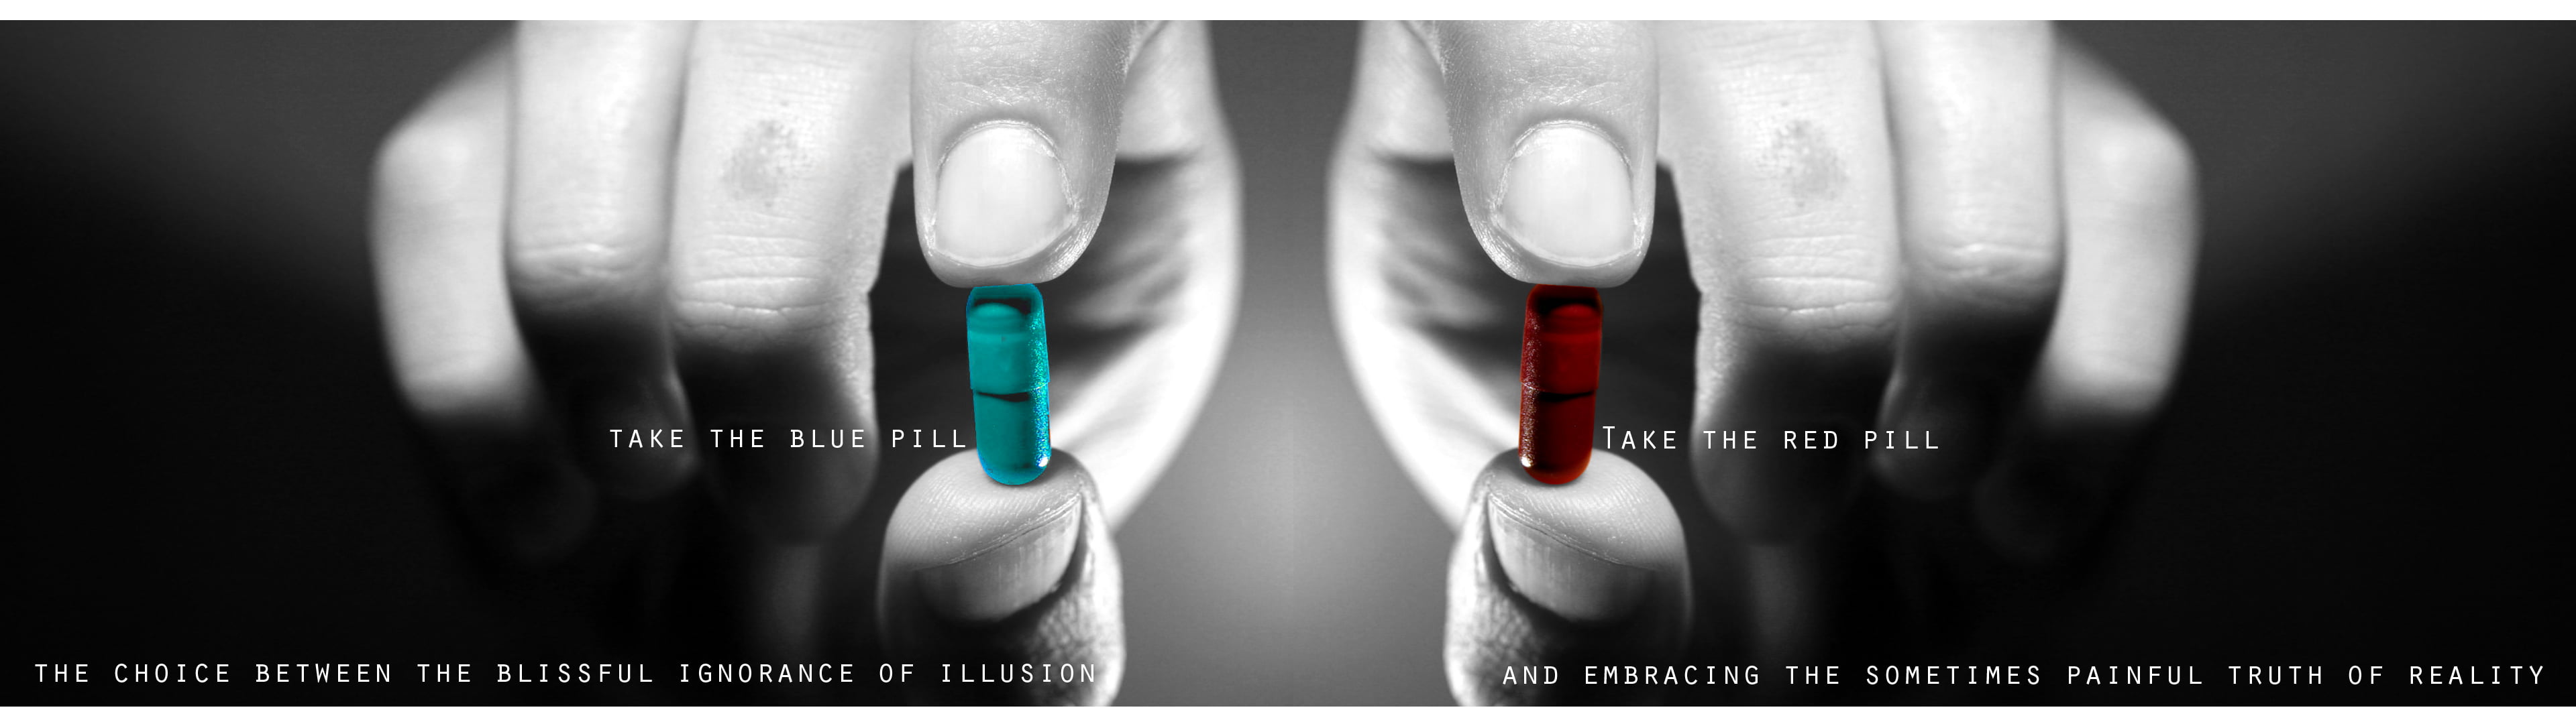 take the blue pill and take the red pill HD wallpaper.